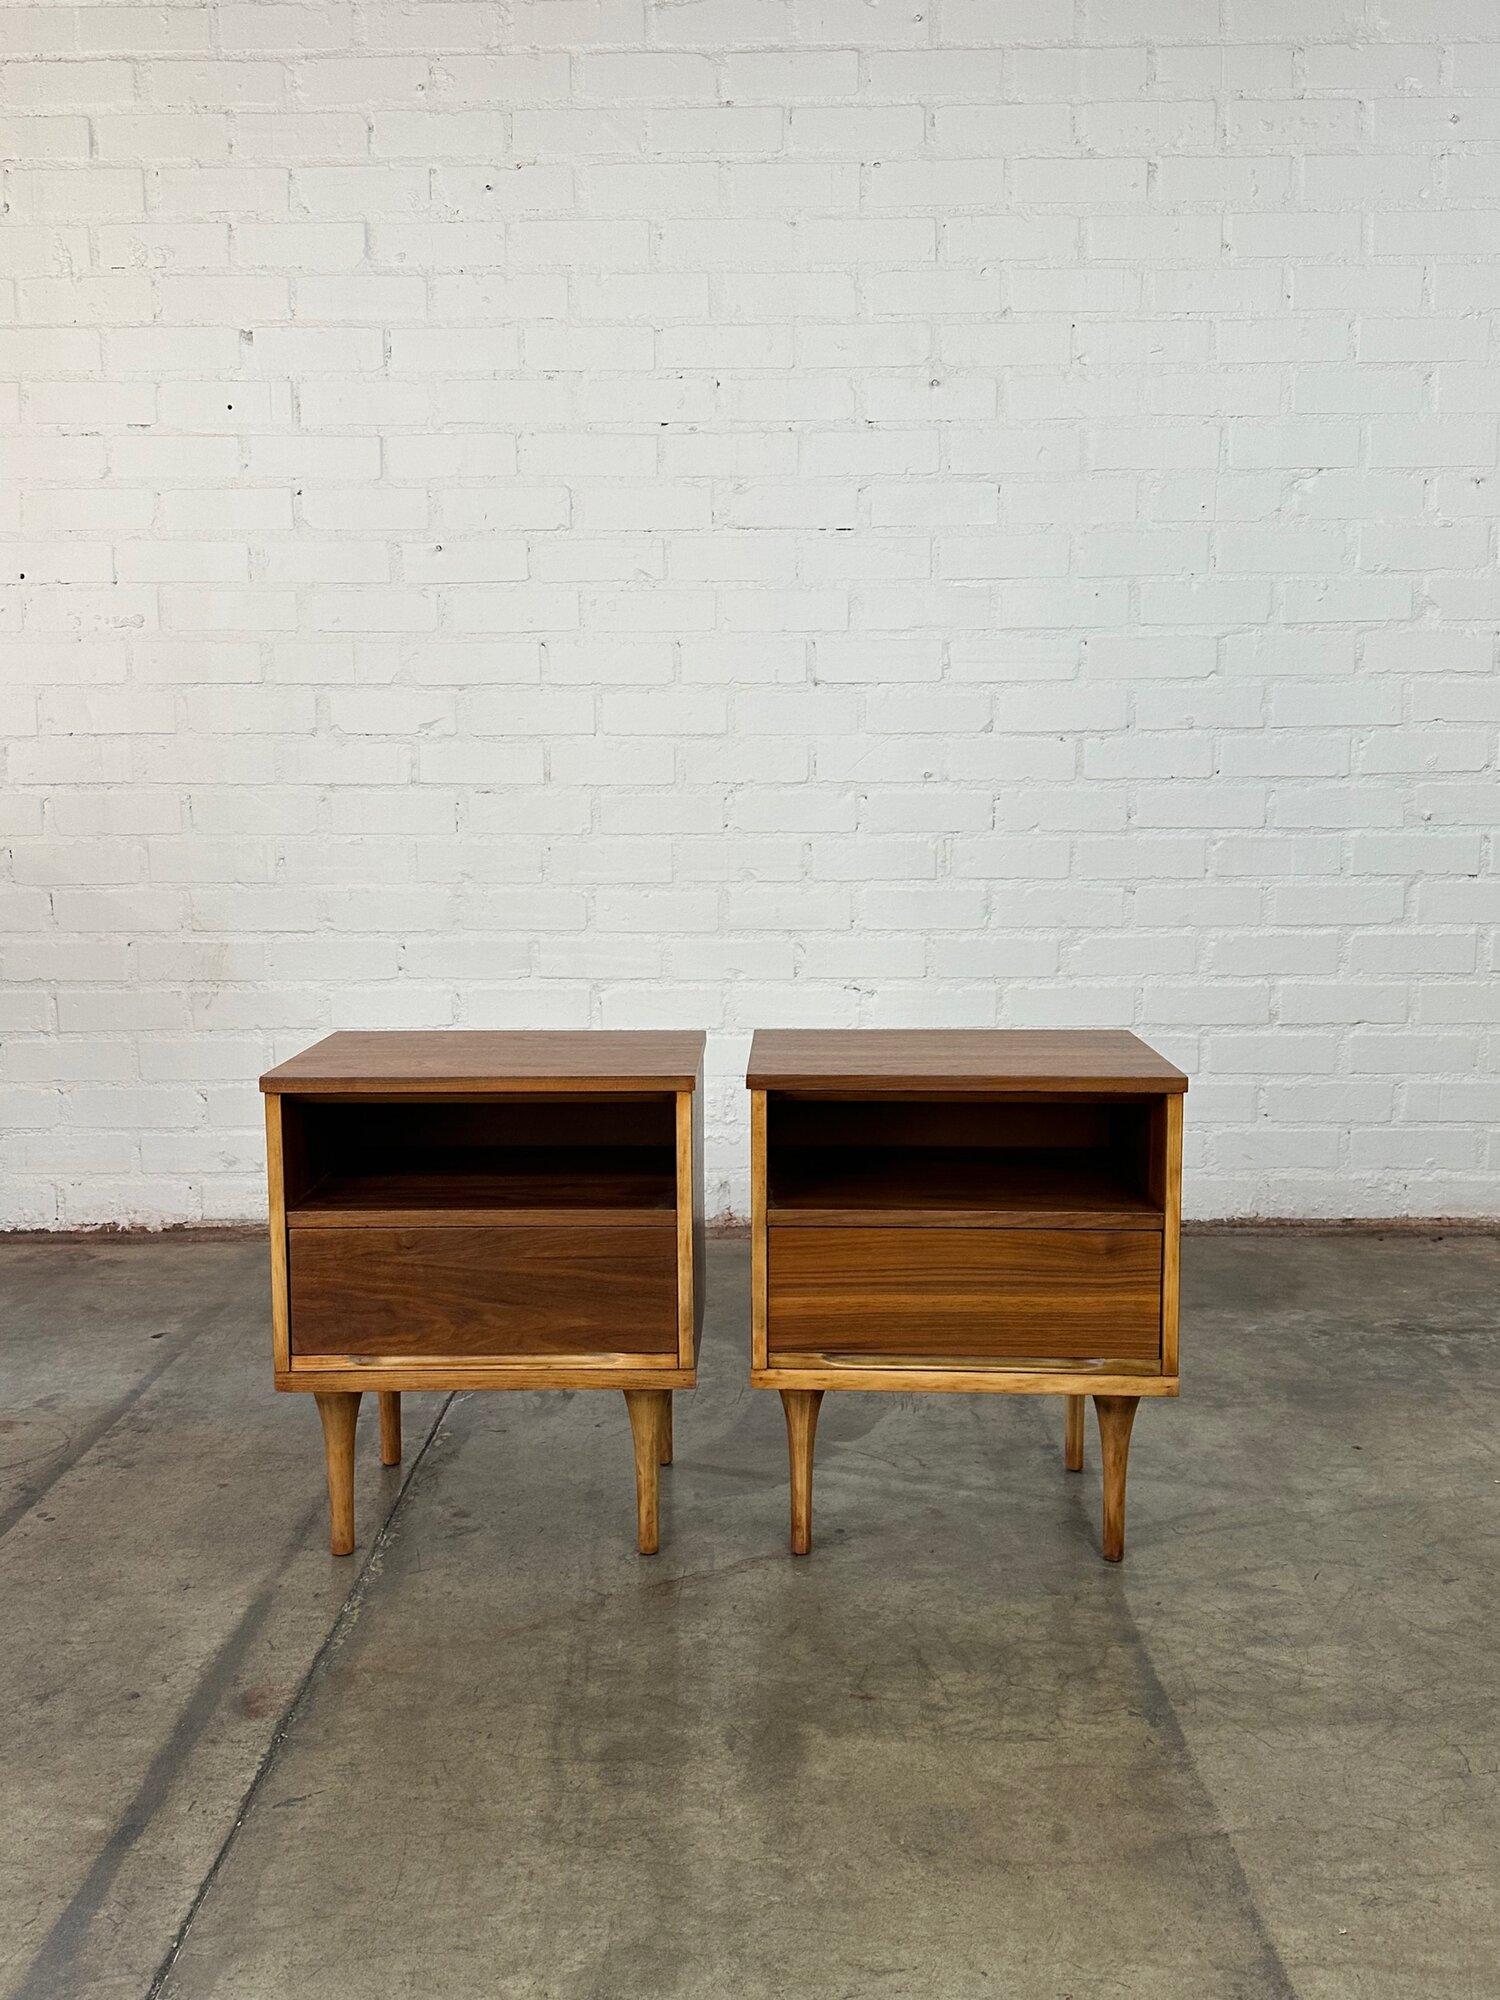 W20.5 D15 H24

Fully restored mid century nightstands. The pair is structurally sound with no major areas of wear. These offer hidden pulls and very nice walnut and oak hues. Price is for the pair.